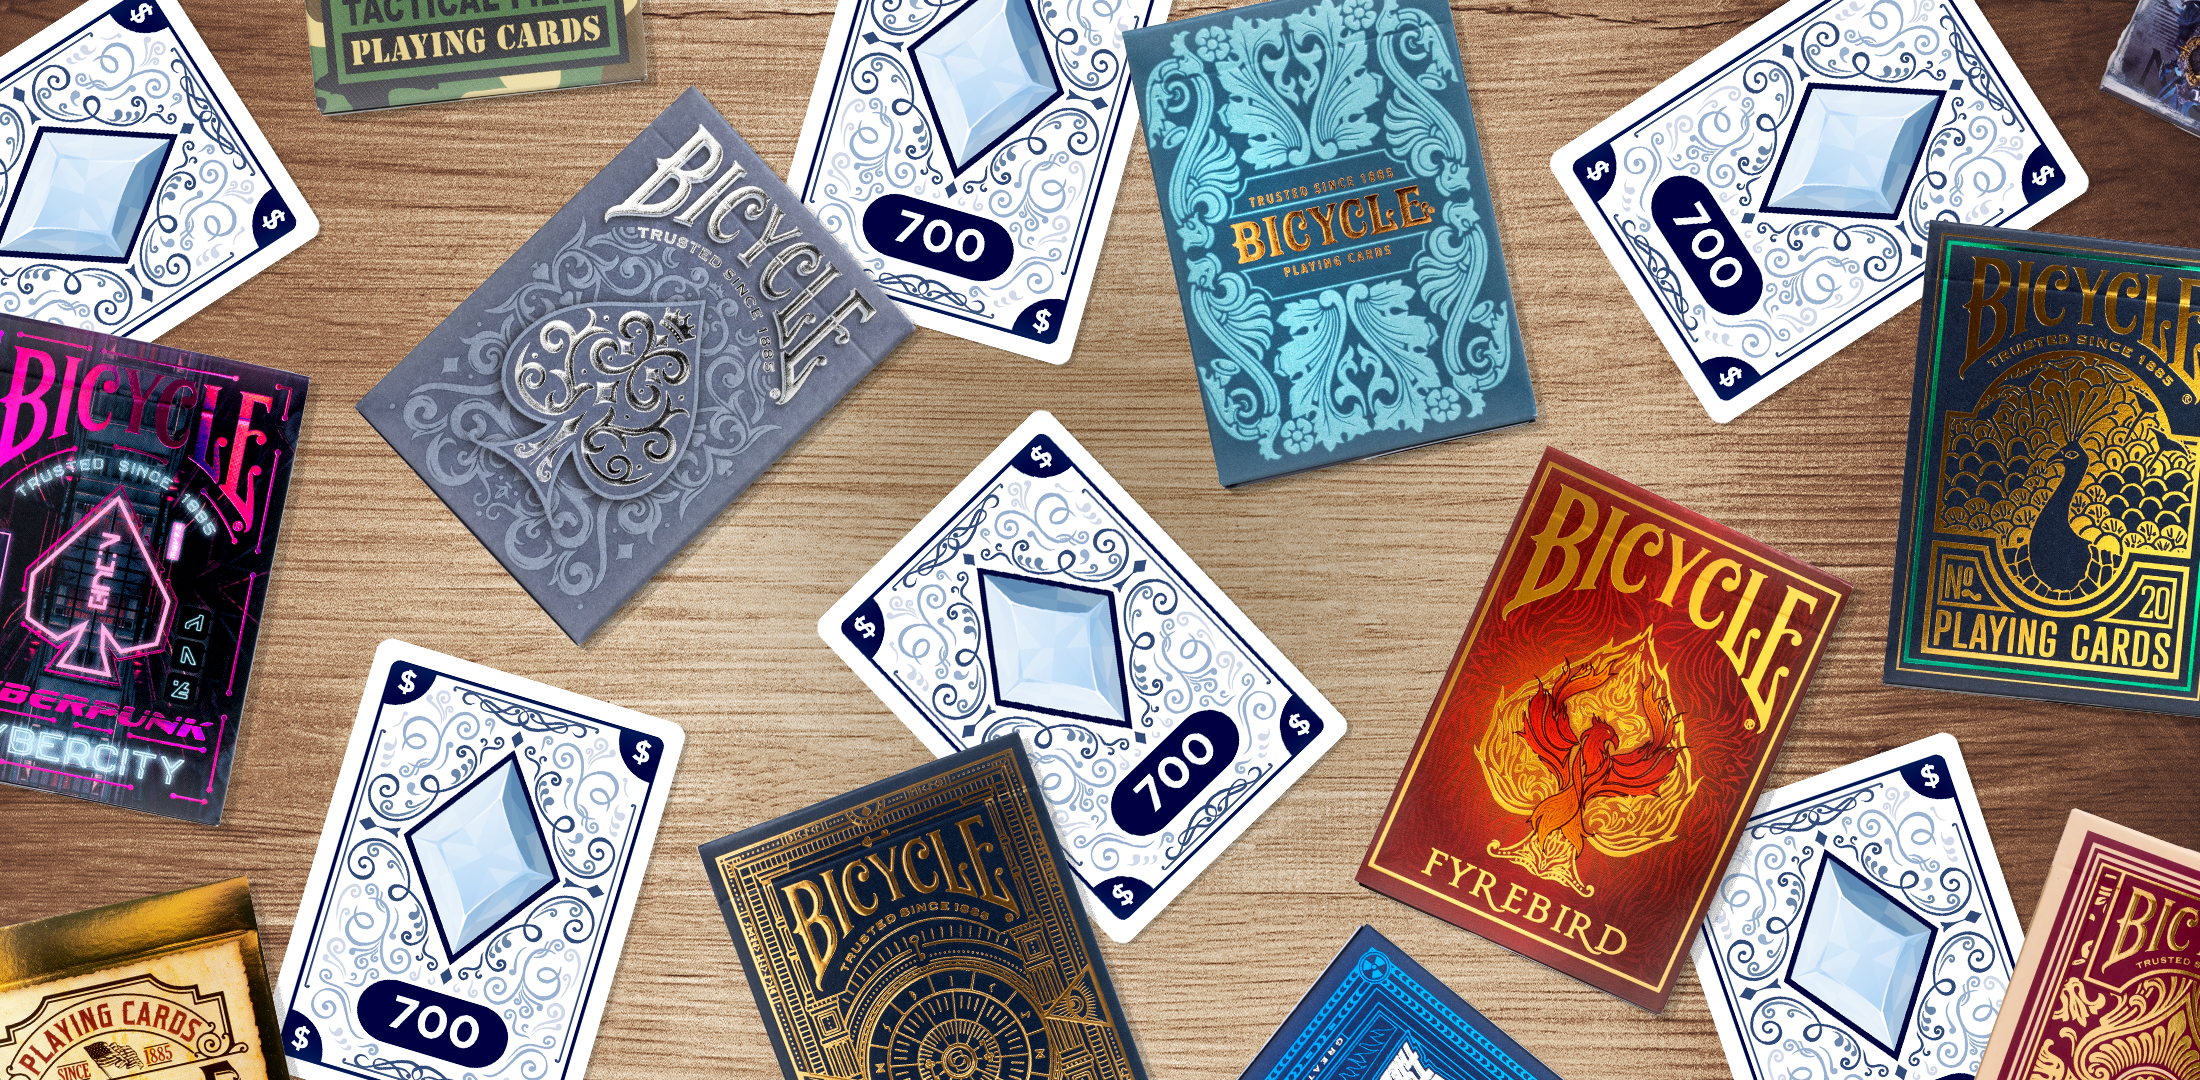 Buy any 2 or more decks of cards with the promo code and unlock a chance to win a deck of cards or app diamonds.